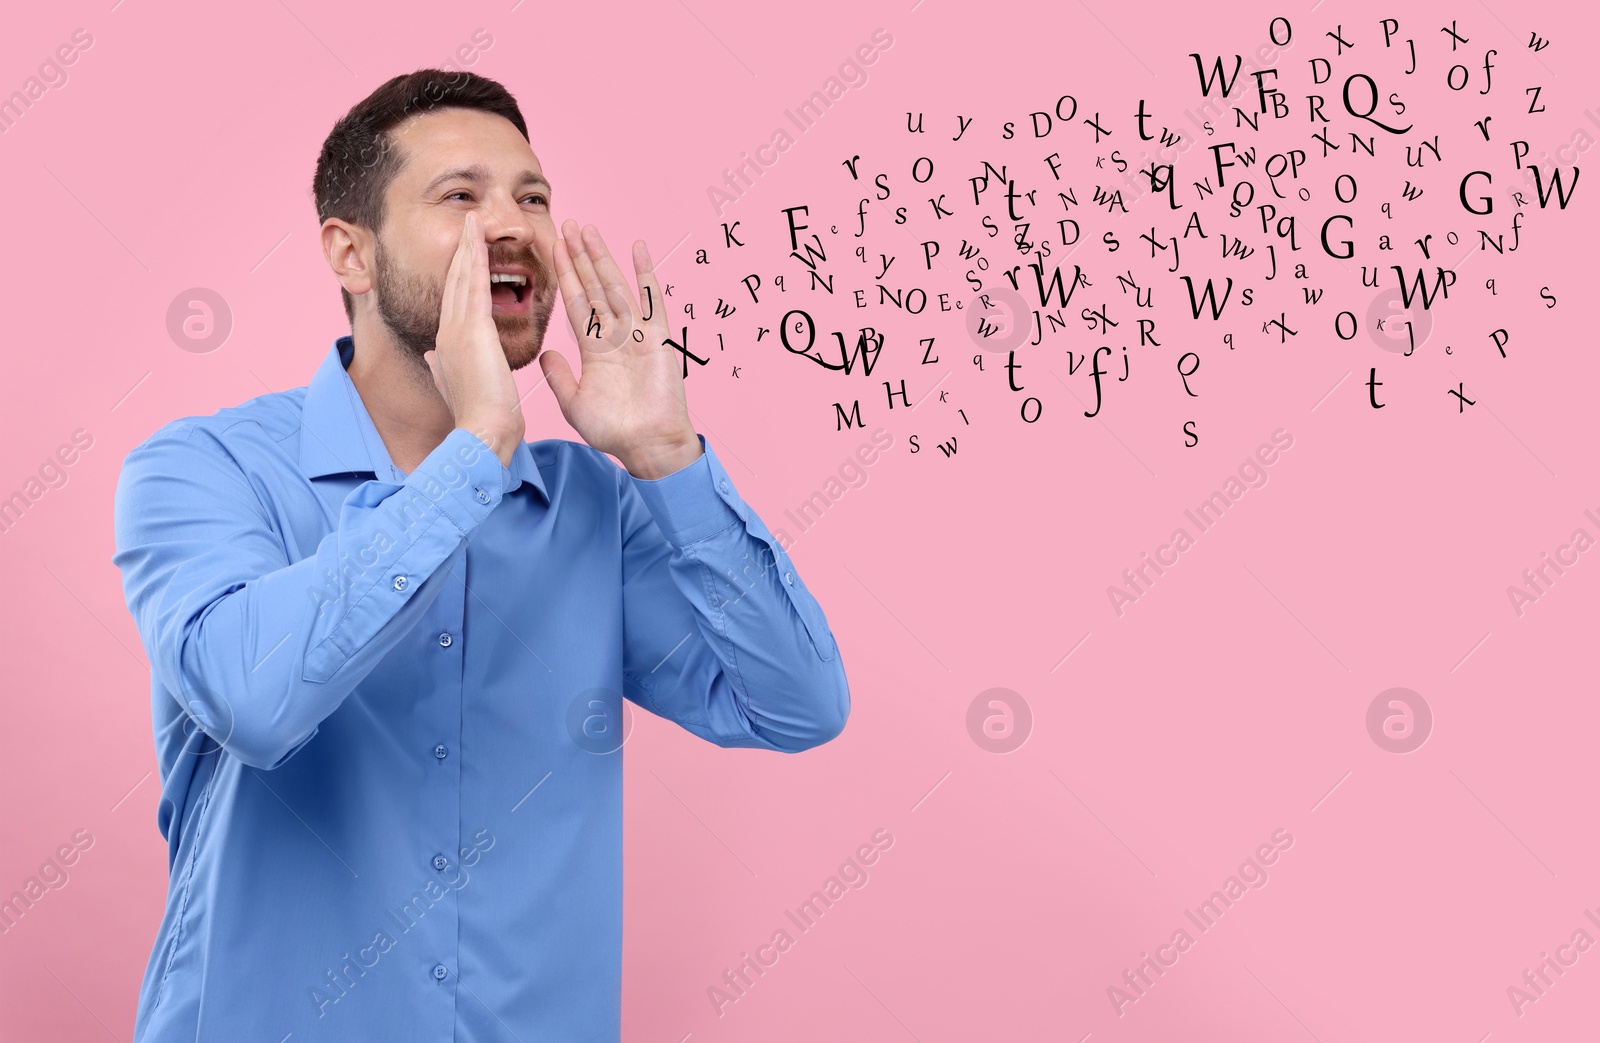 Image of Man shouting something on pink background. Letters flying out of his mouth